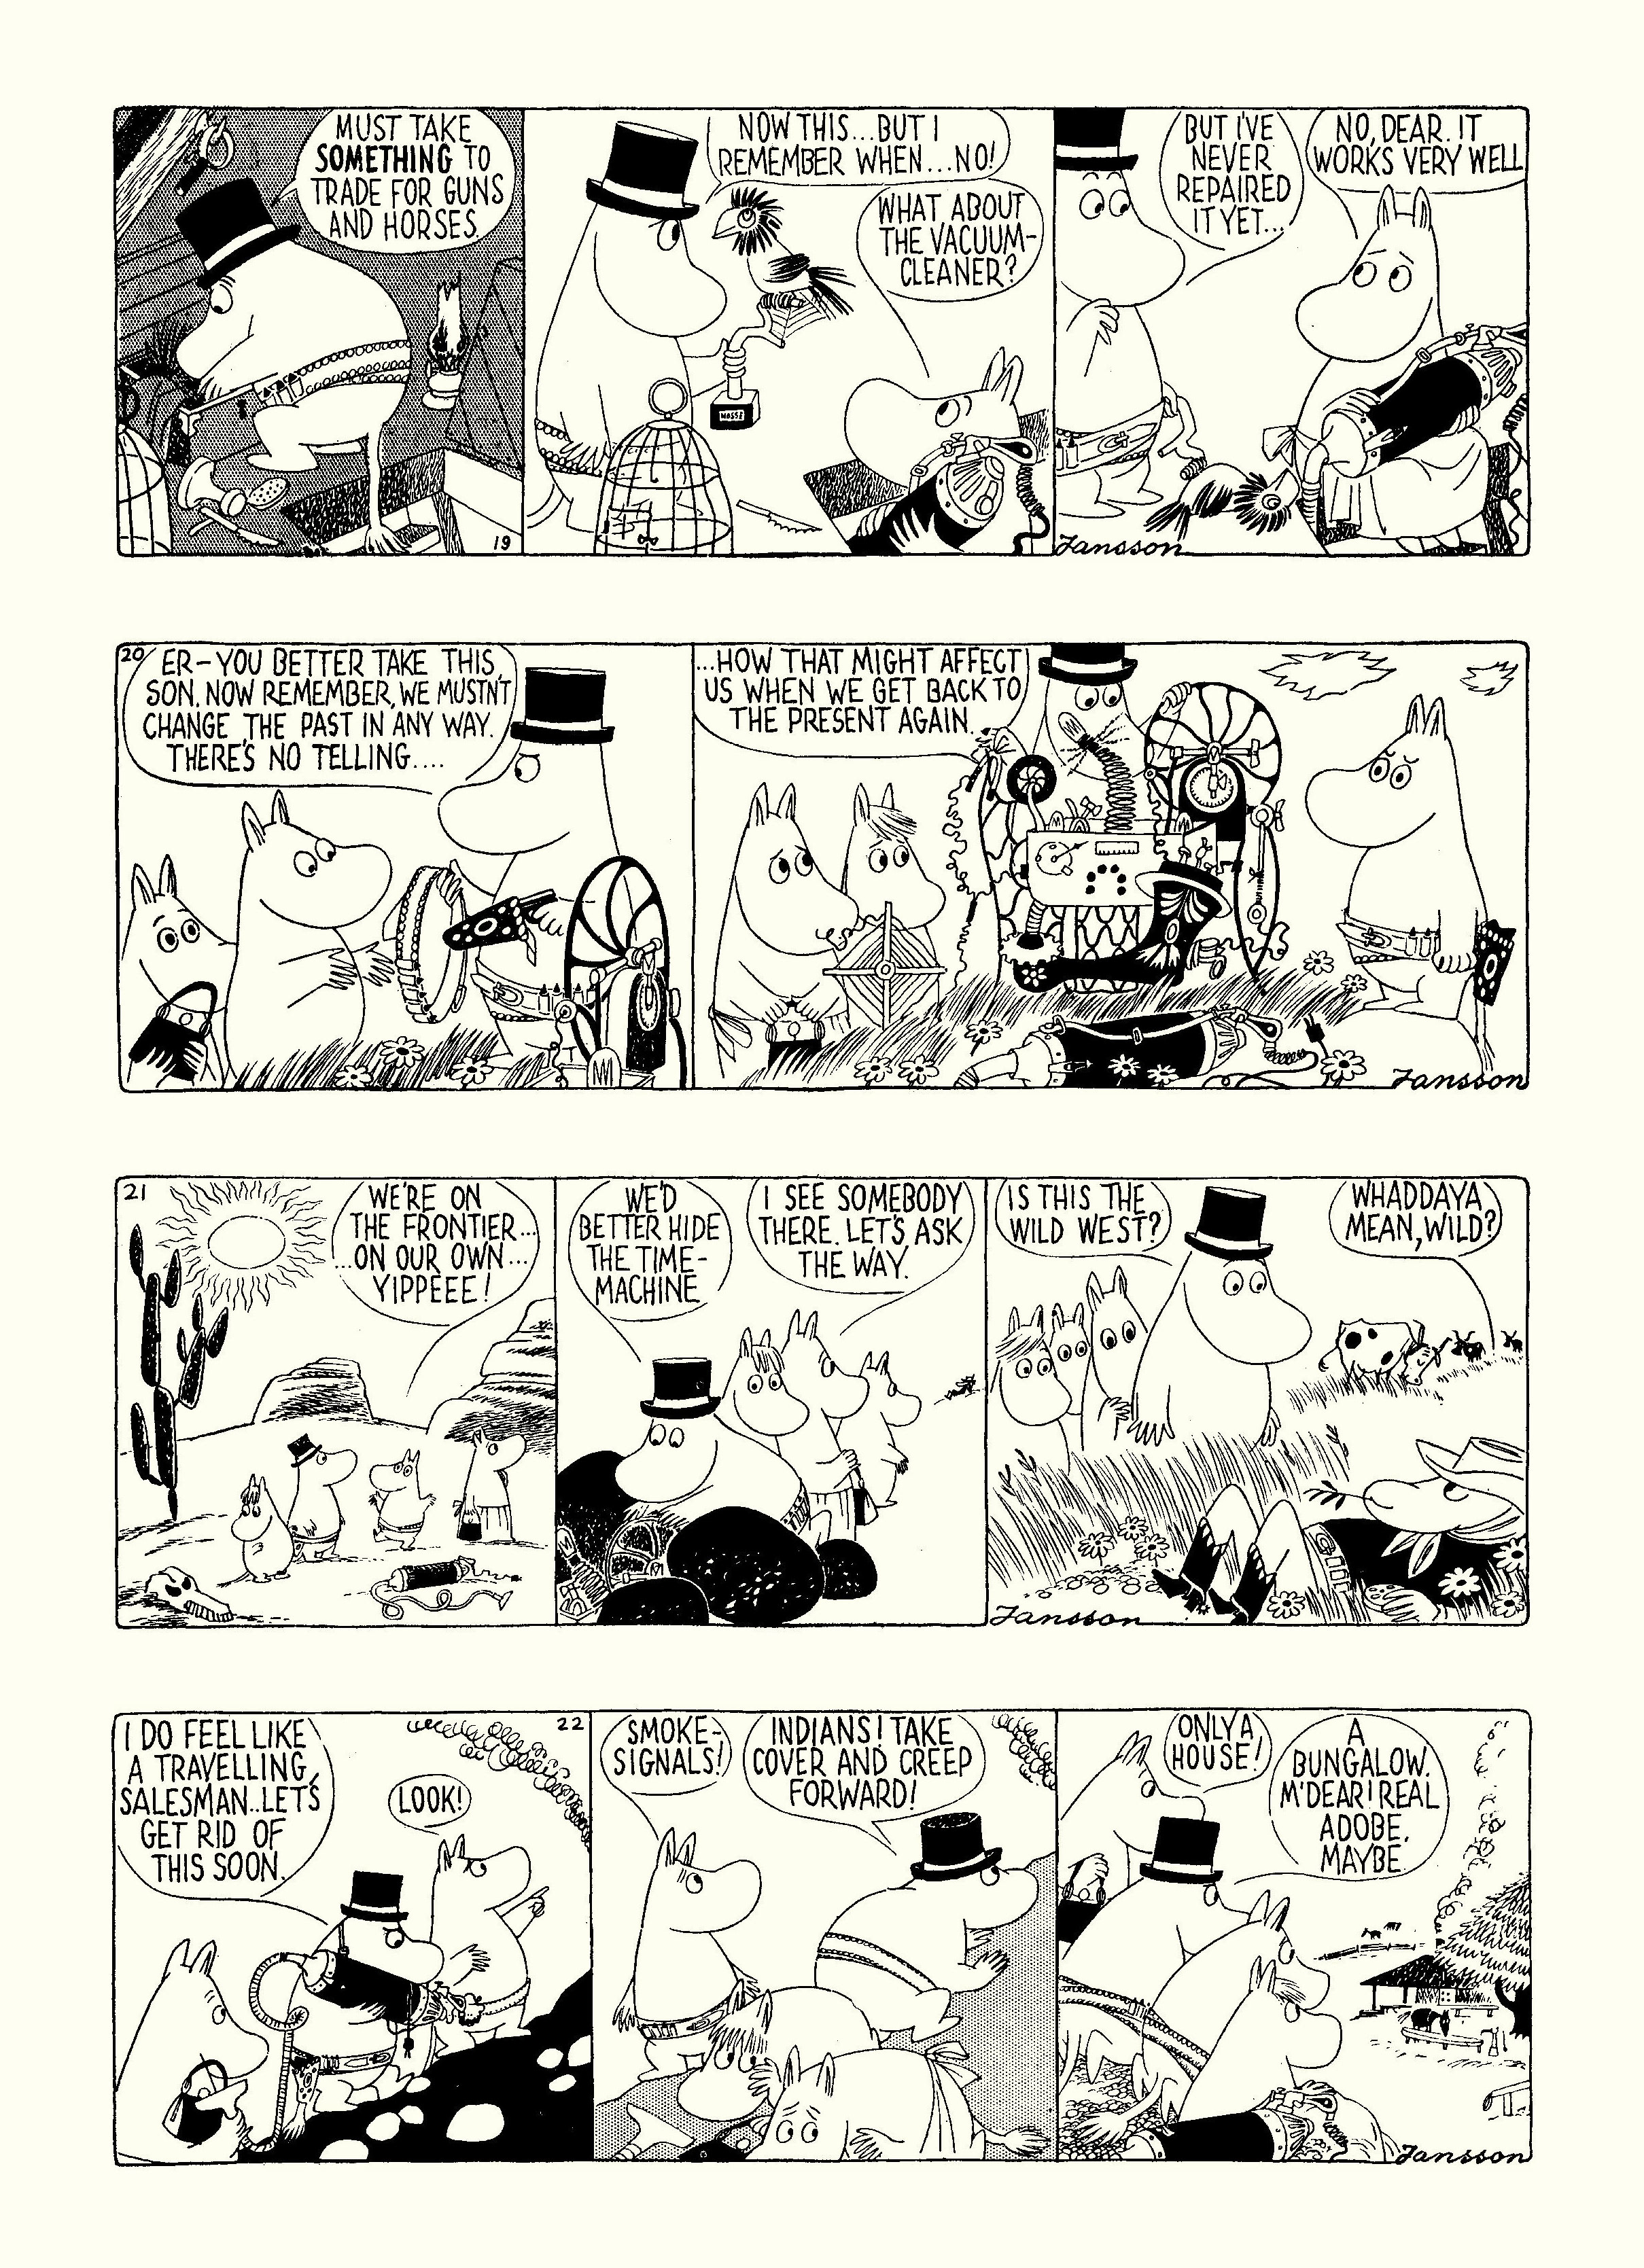 Read online Moomin: The Complete Tove Jansson Comic Strip comic -  Issue # TPB 4 - 11